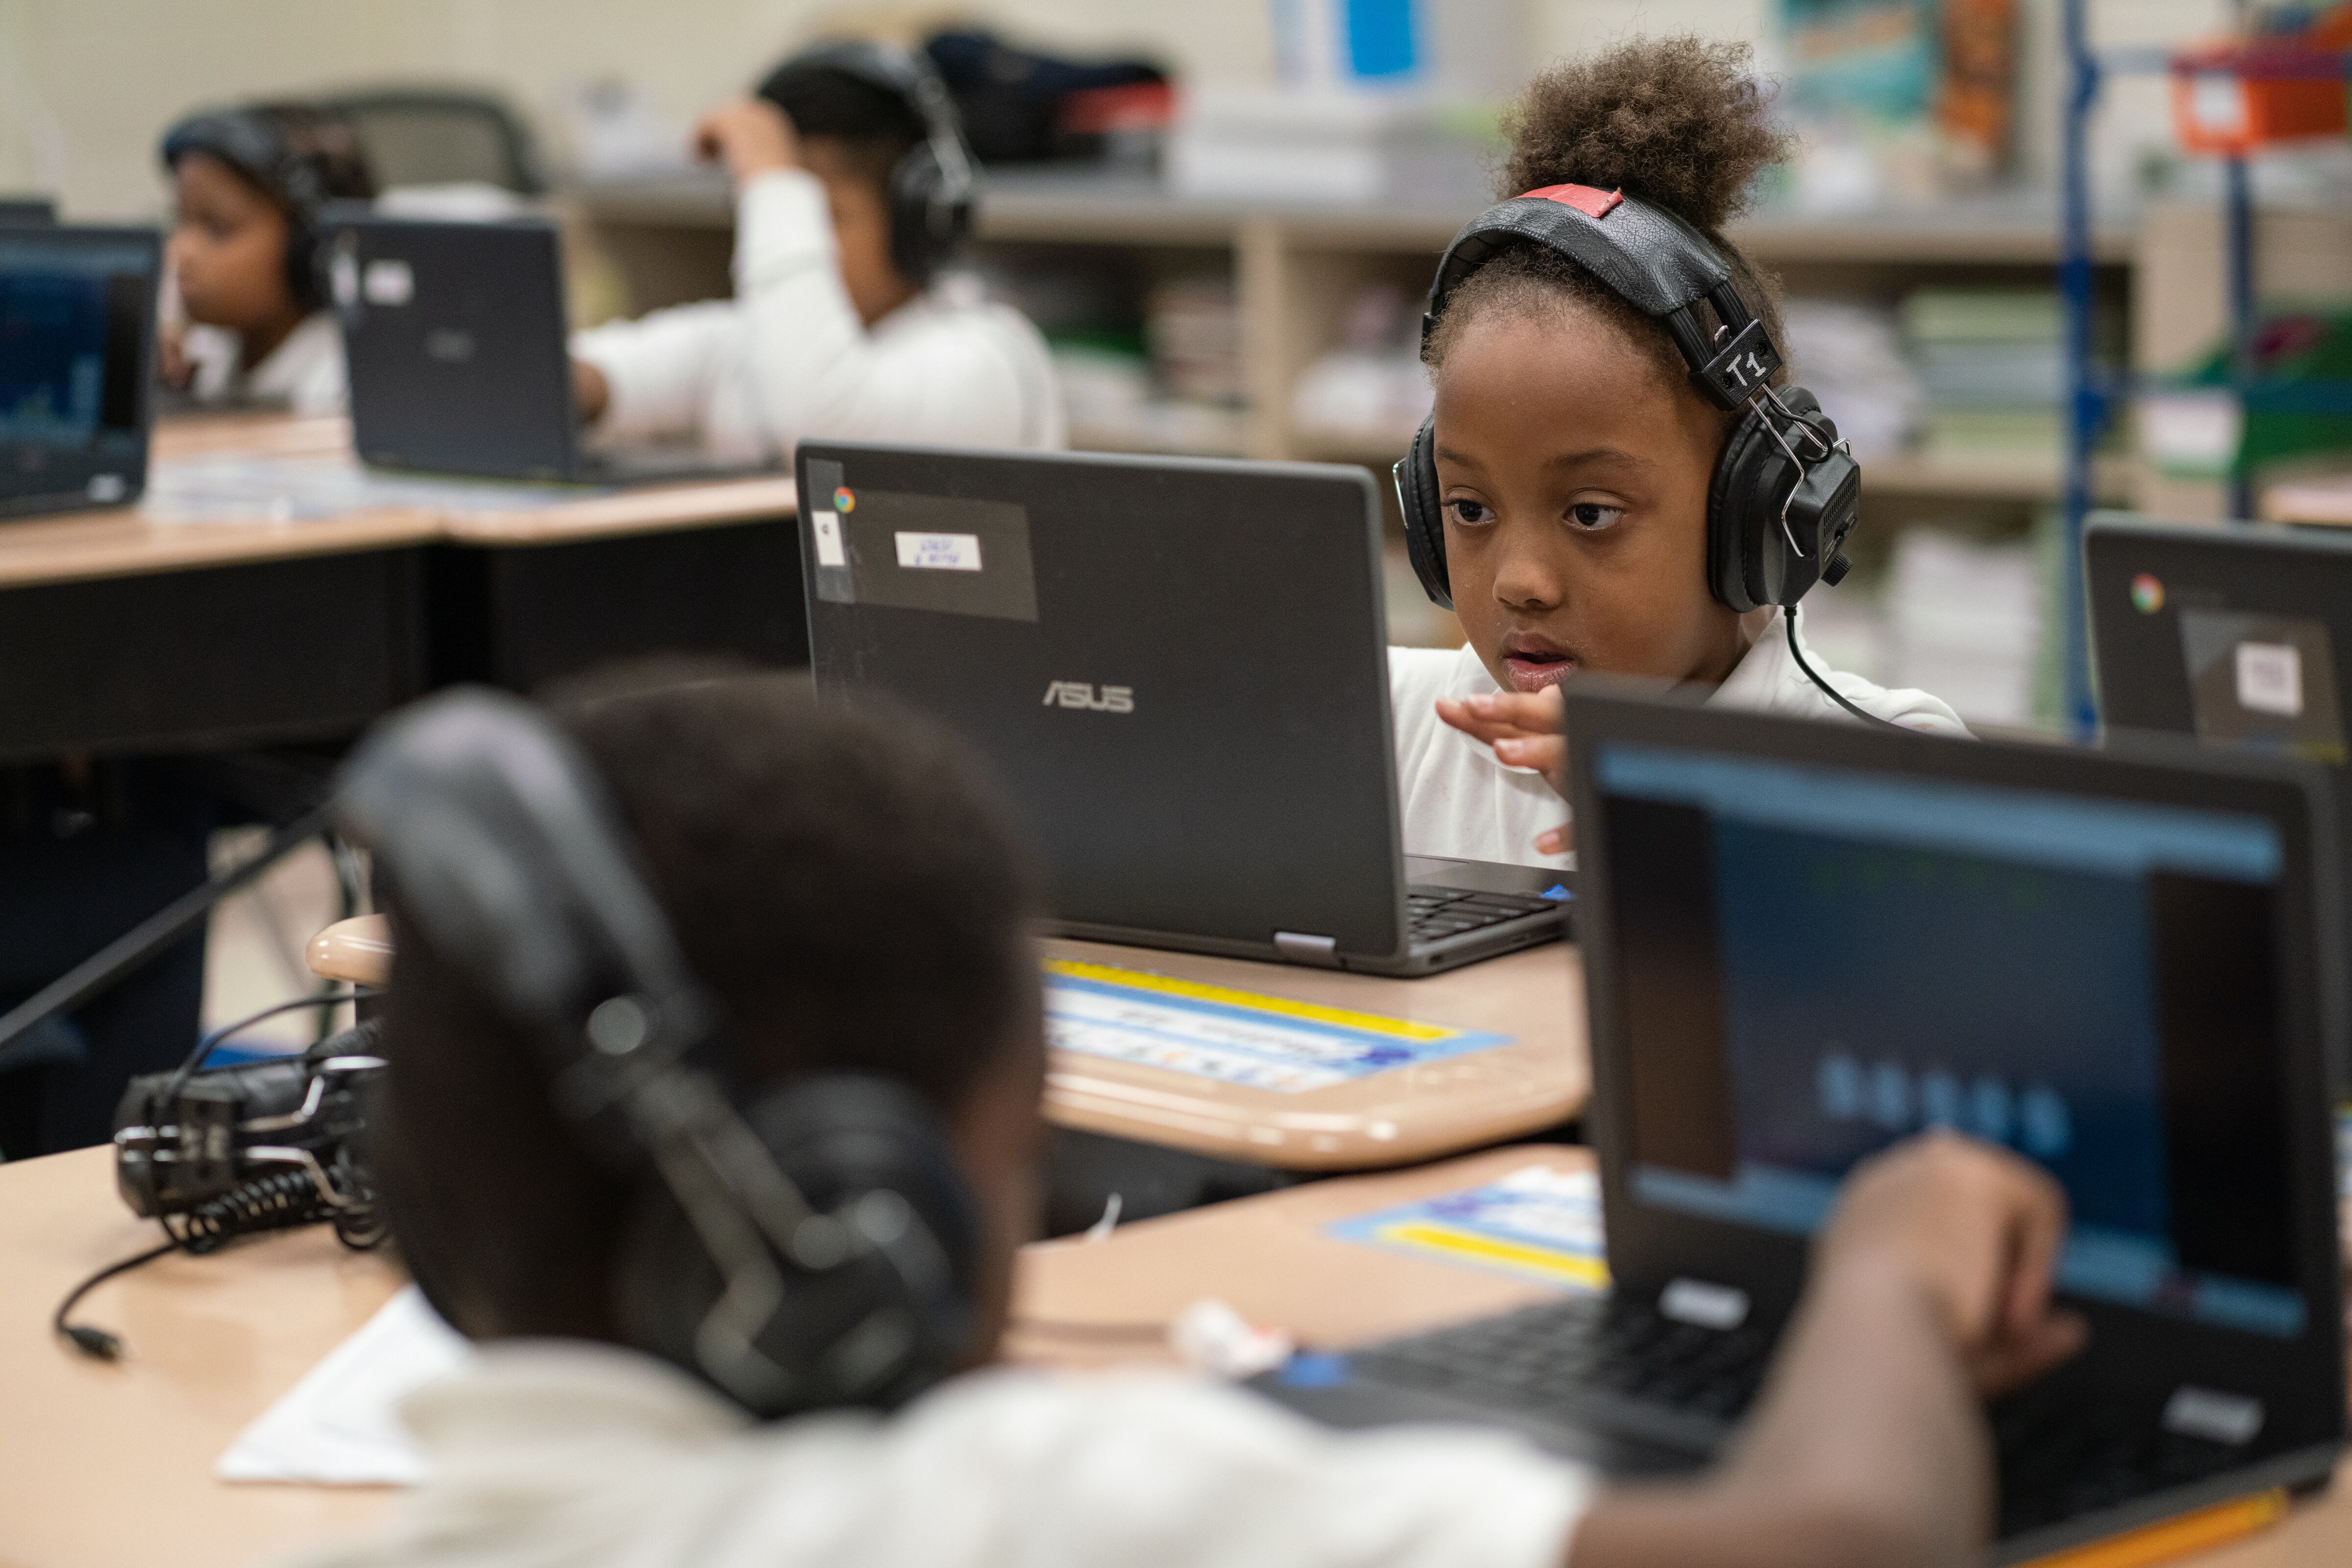 A student wearing headphones works at a laptop, surrounded by other students working in the classroom.